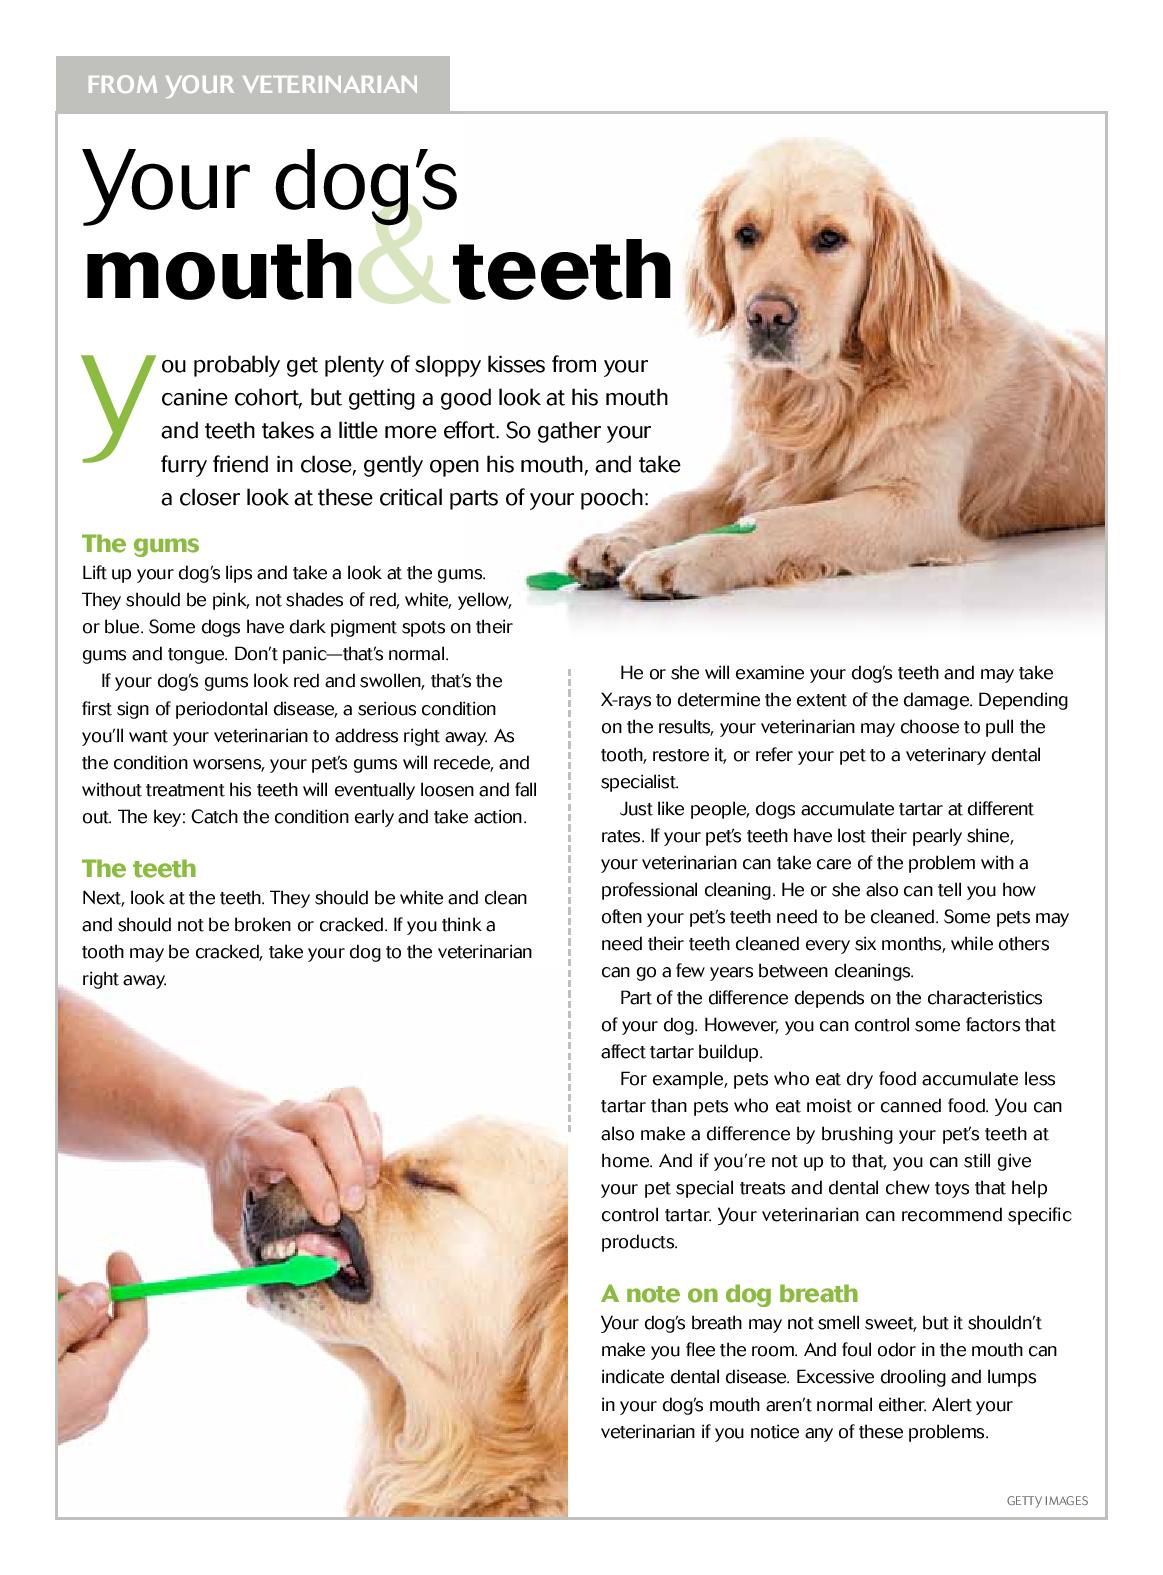 Your Dog's Mouth & Teeth